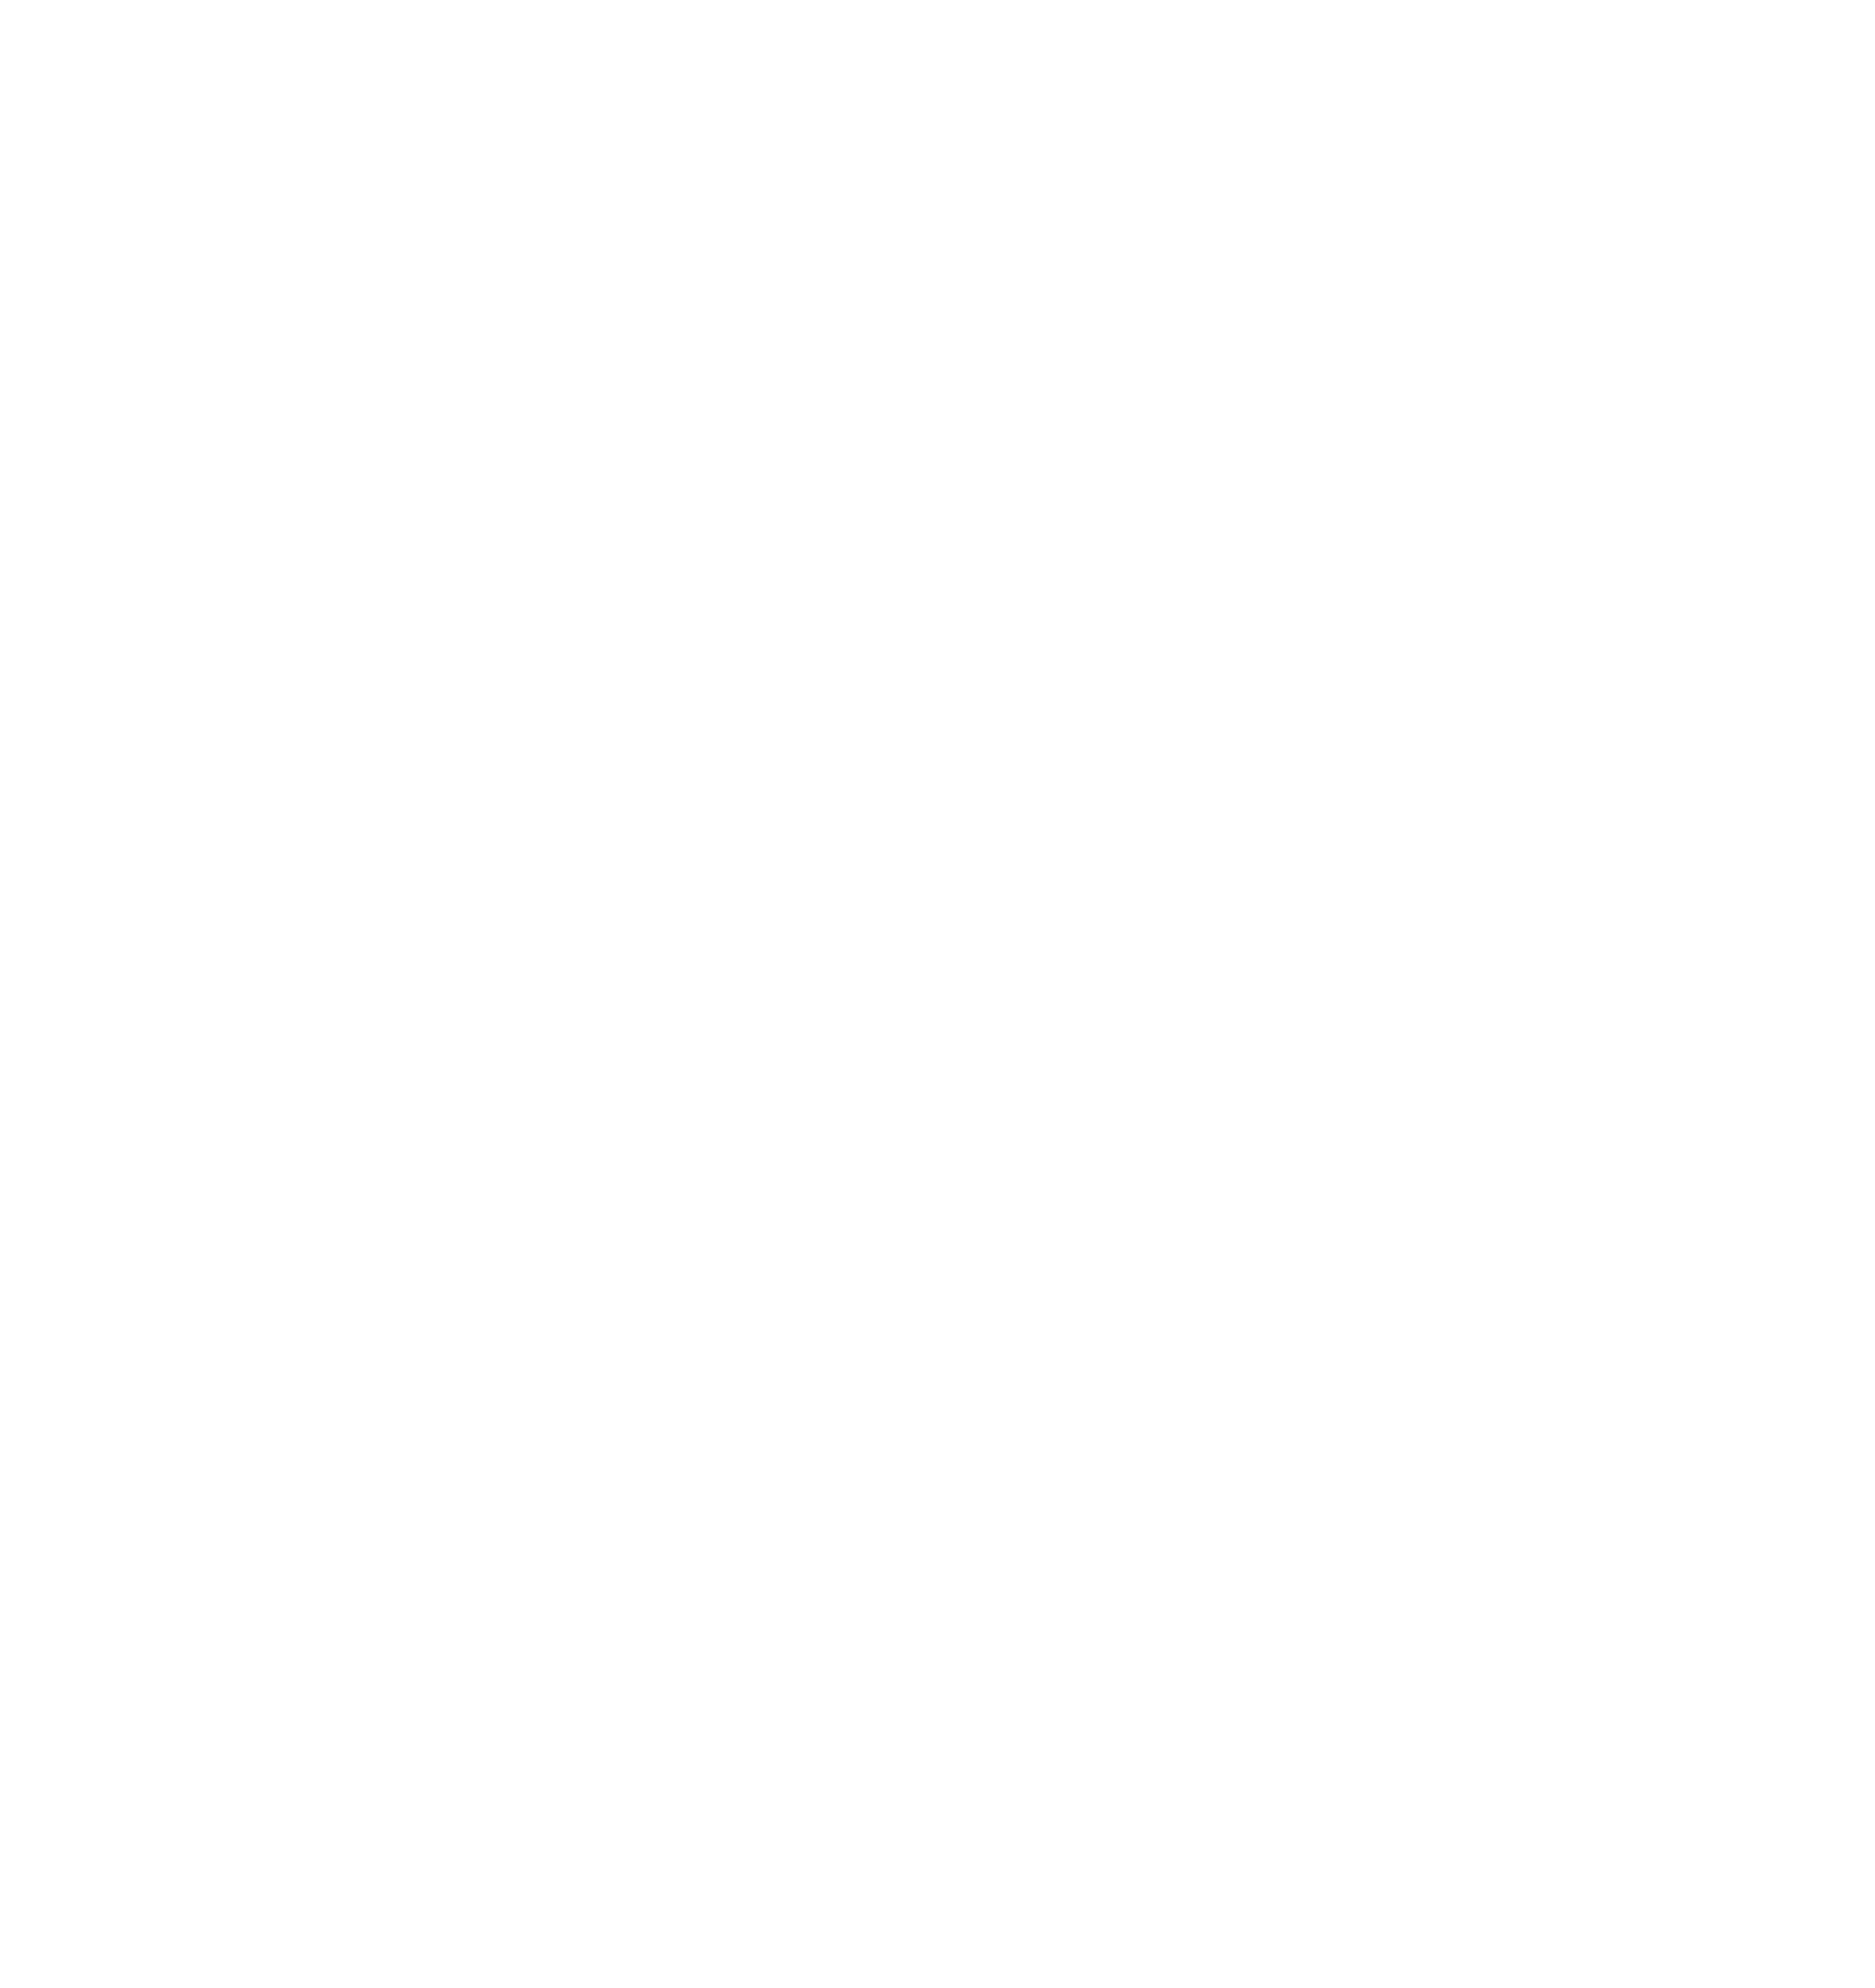 Company logo of a retro computer with a smiley face on the monitor